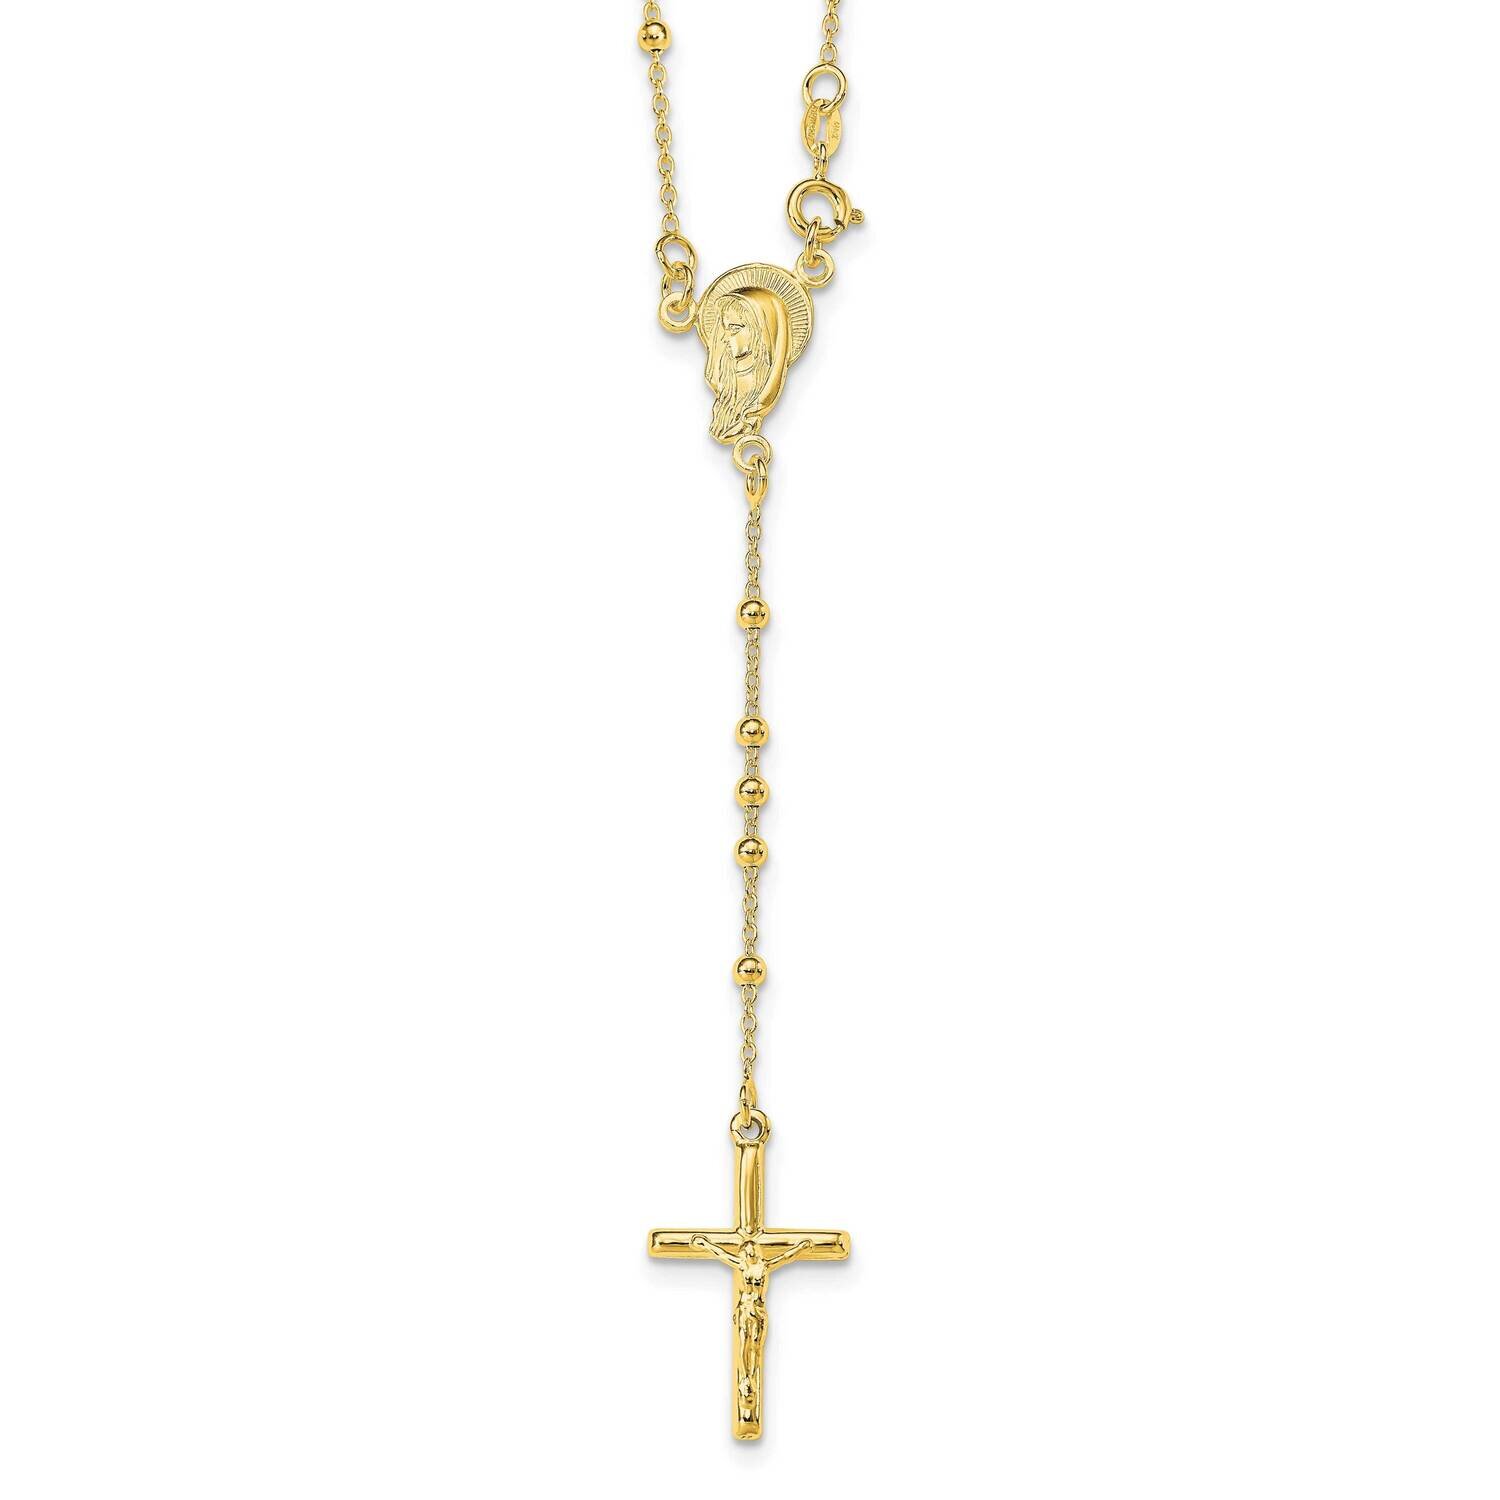 Polished Rosary Necklace 18 Inch Sterling Silver Gold-Plated QHY2393-18